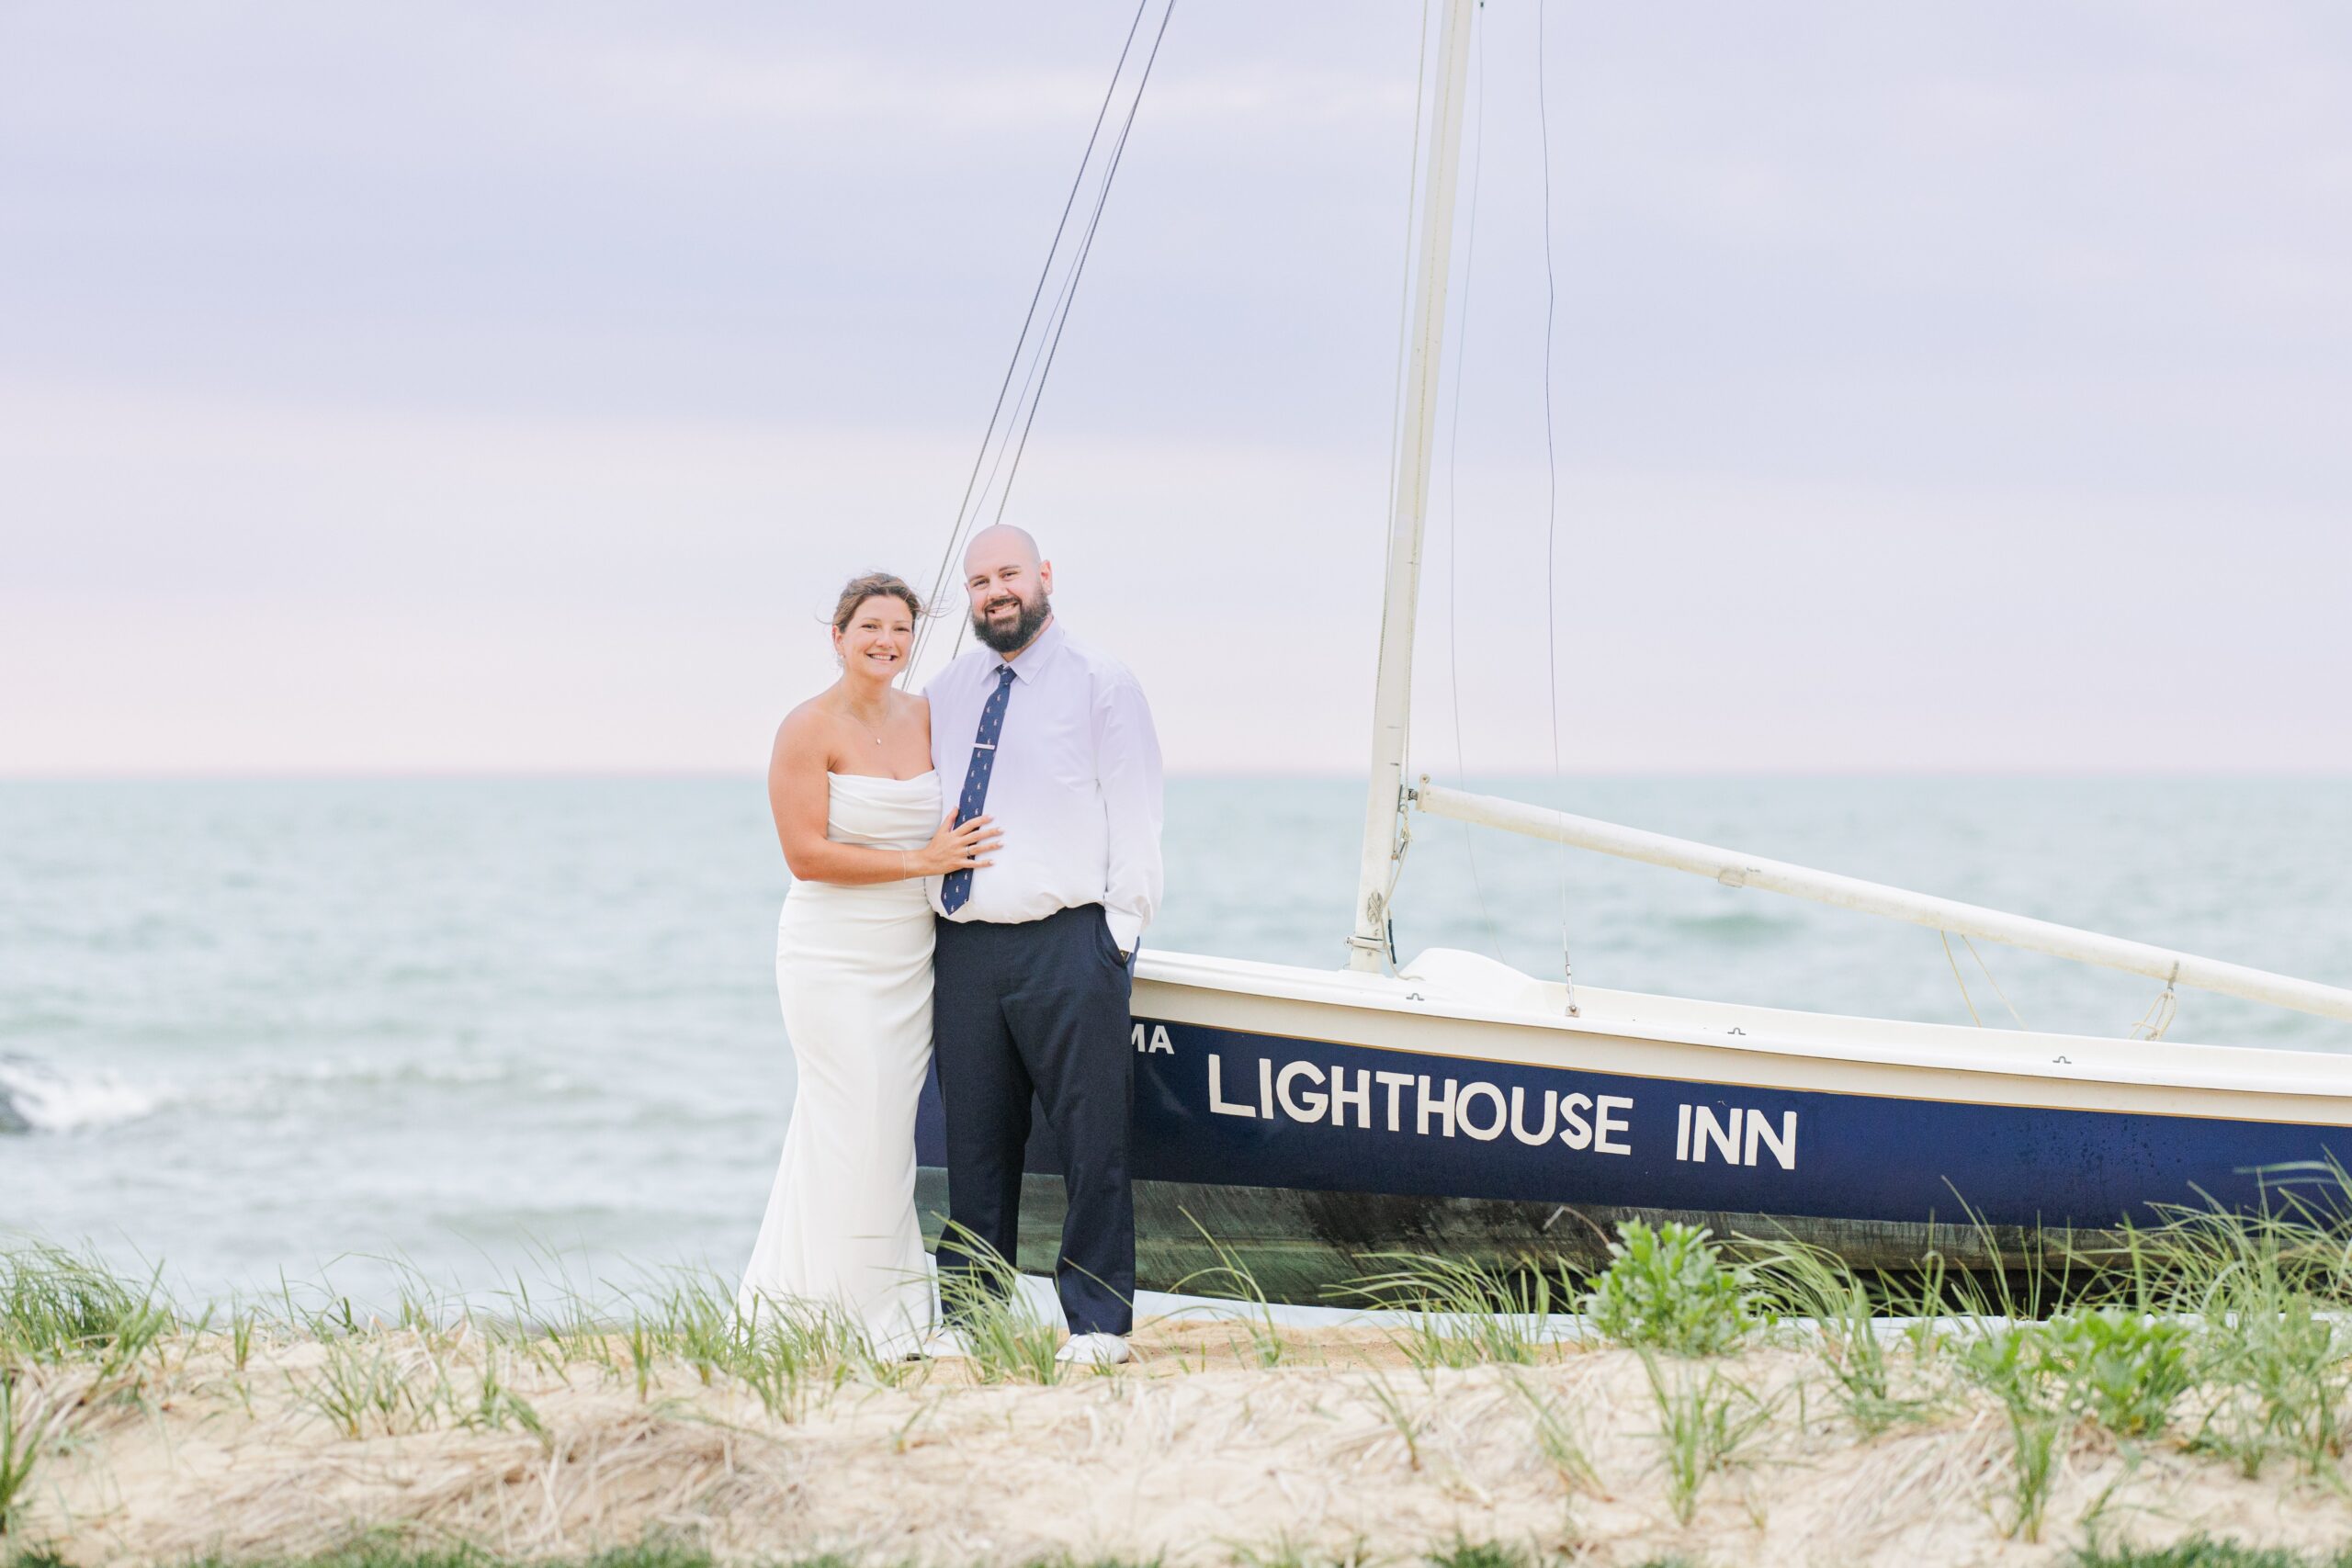 Bride and groom embracing on the beach at sunset. Location: Lighthouse Inn, Cape Cod